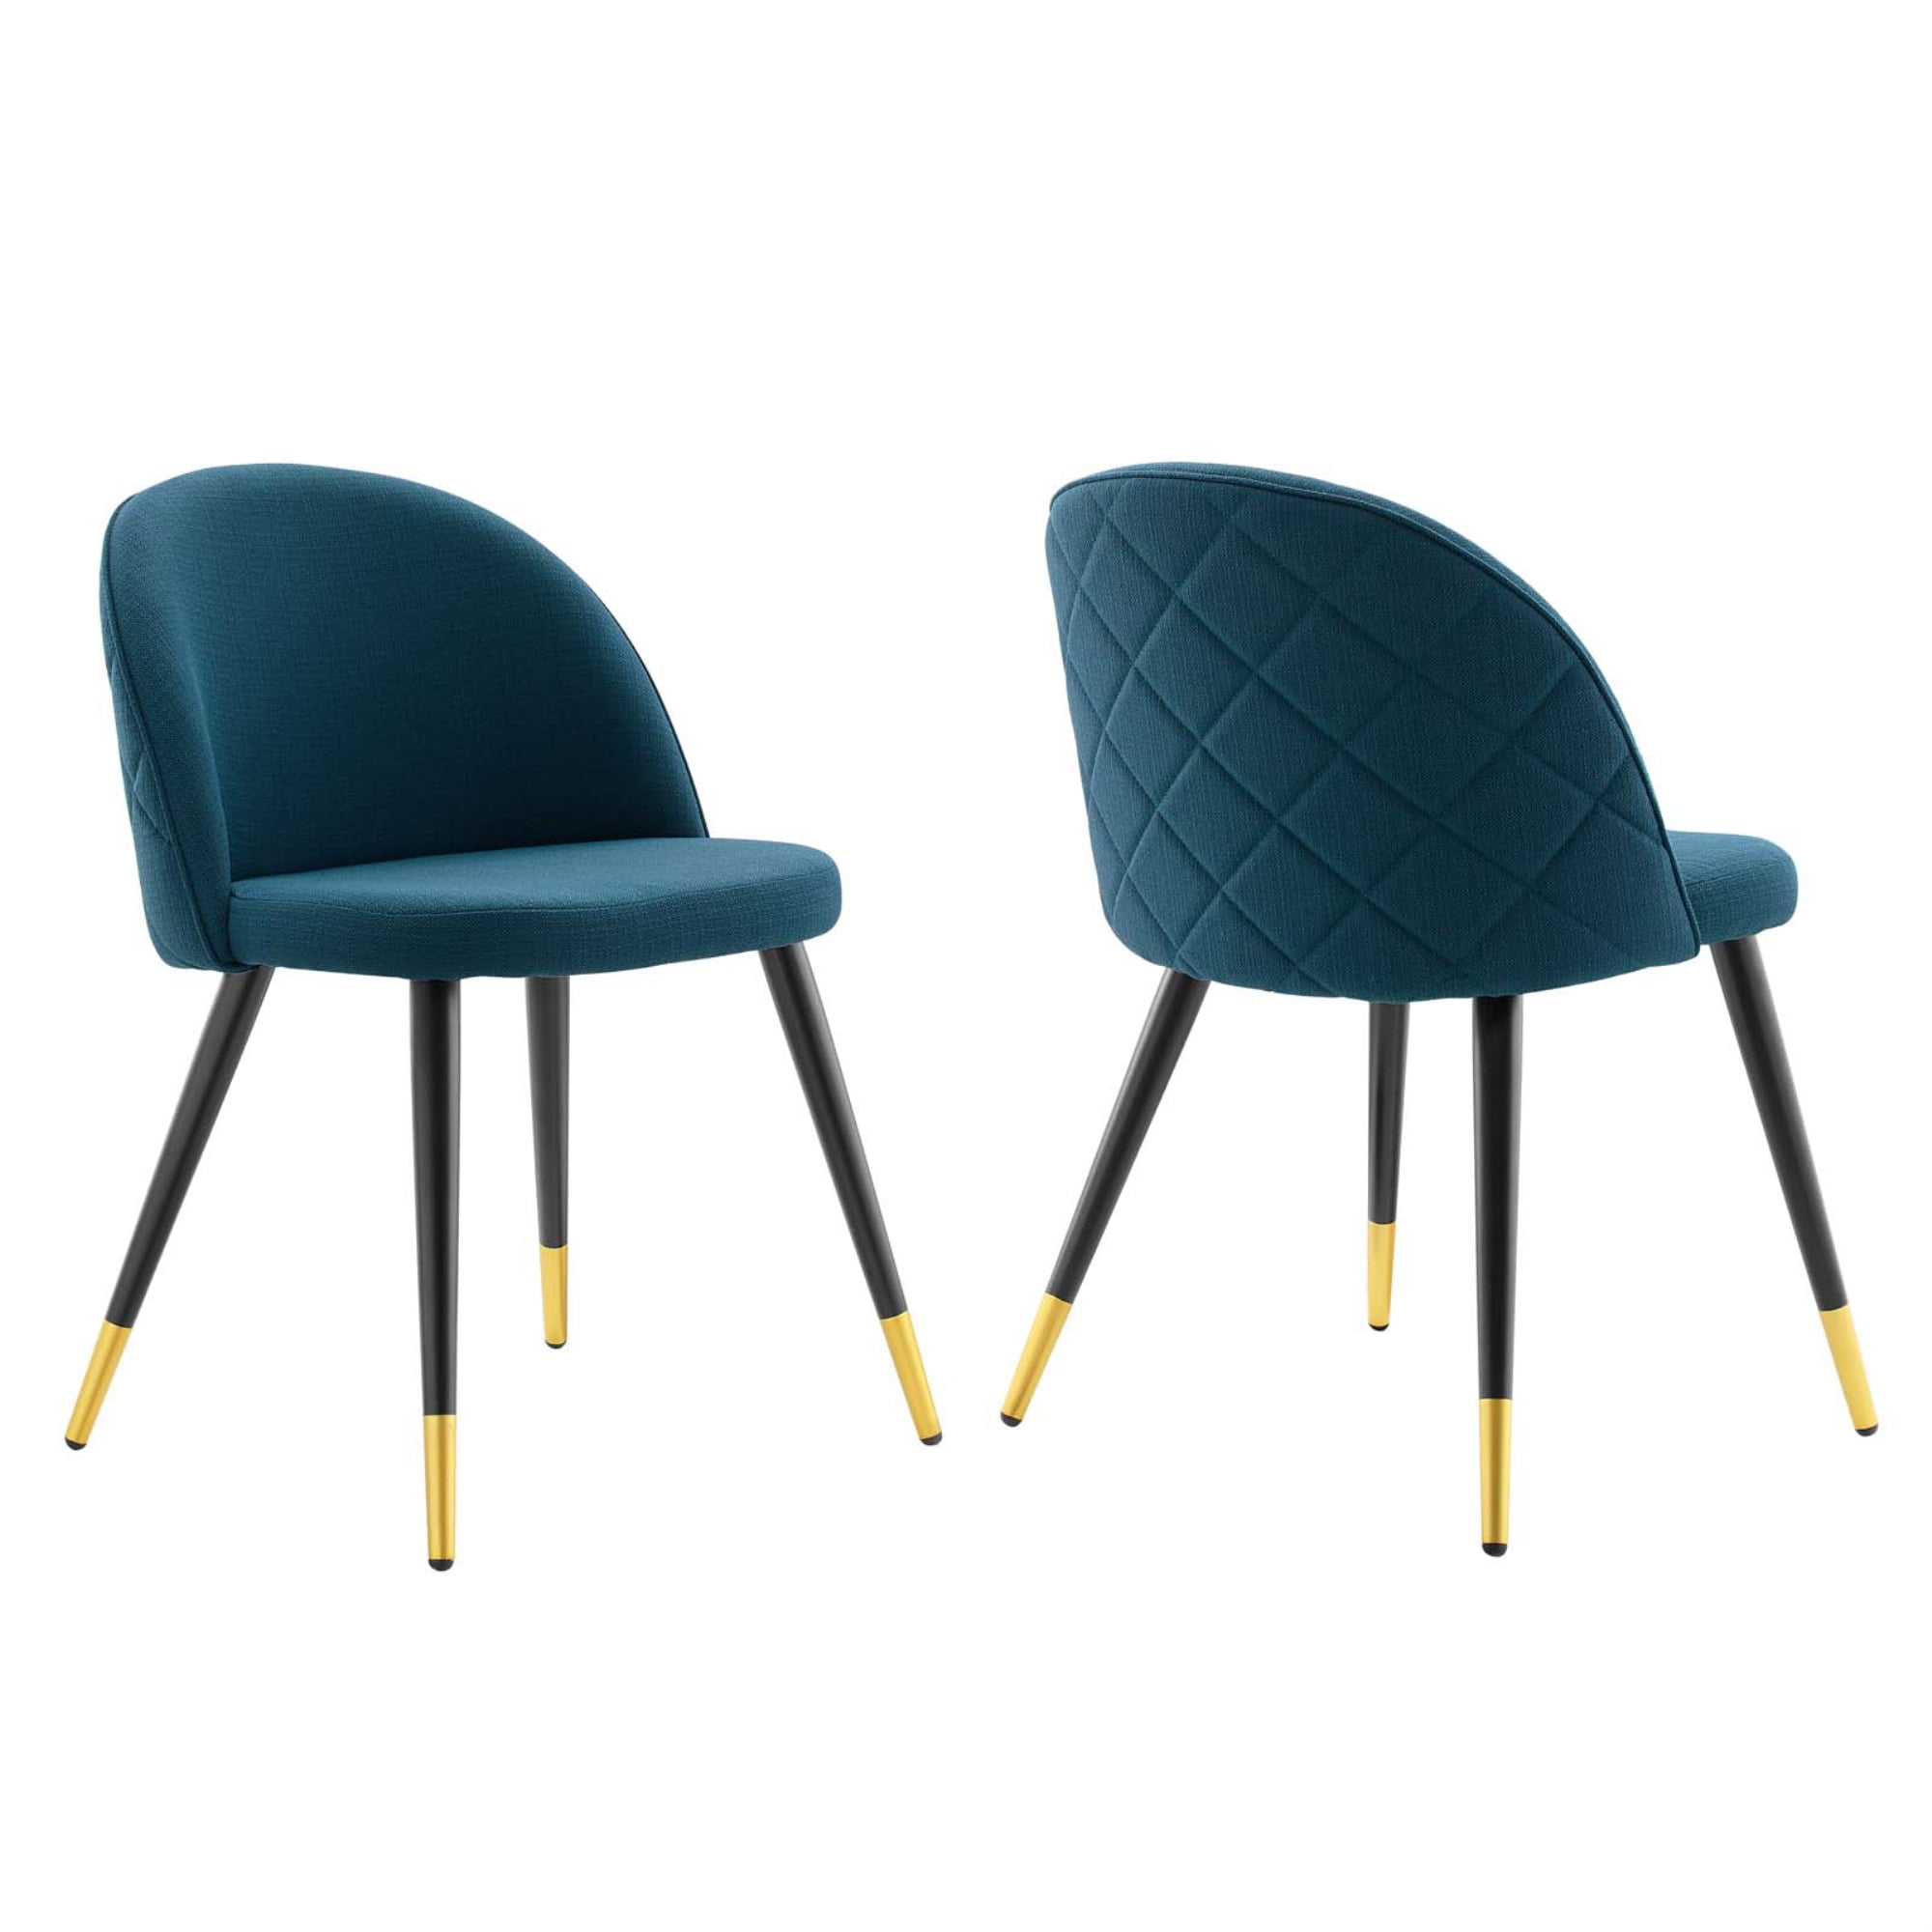 Blue Upholstered Side Chairs with Metal Legs Leisure Vanity Accent Soft Velvet Seat & Backrest IDS Online Mid Century Dining Set of 2 Makeup Living Room